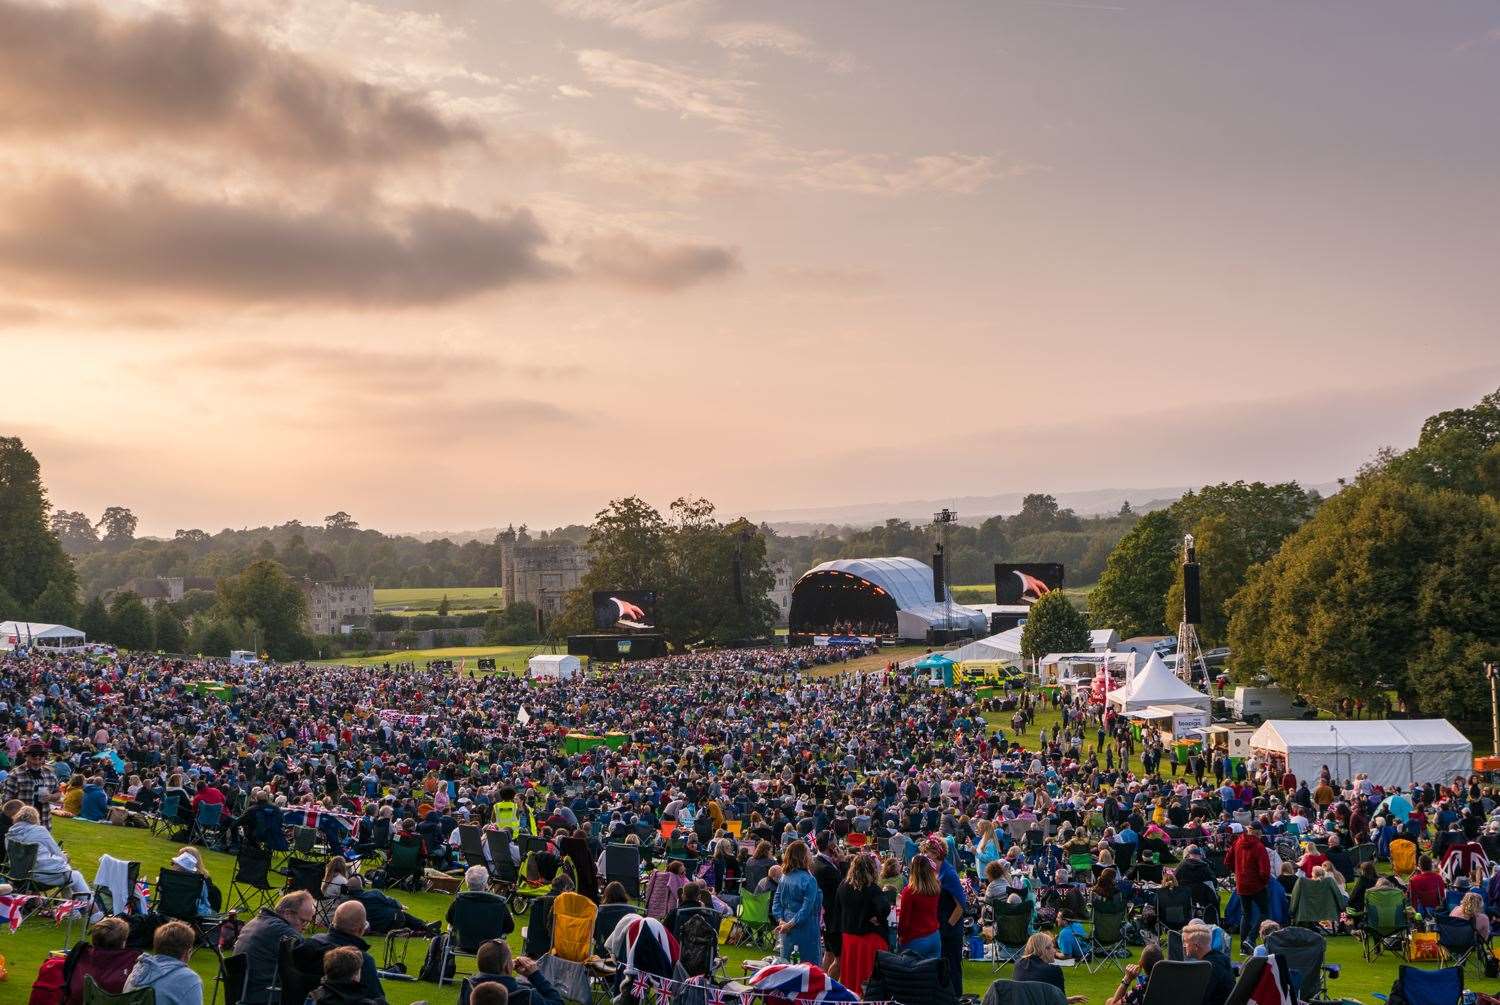 Enjoy a truly special night at Leeds Castle Concert. Picture: Big Plan Group